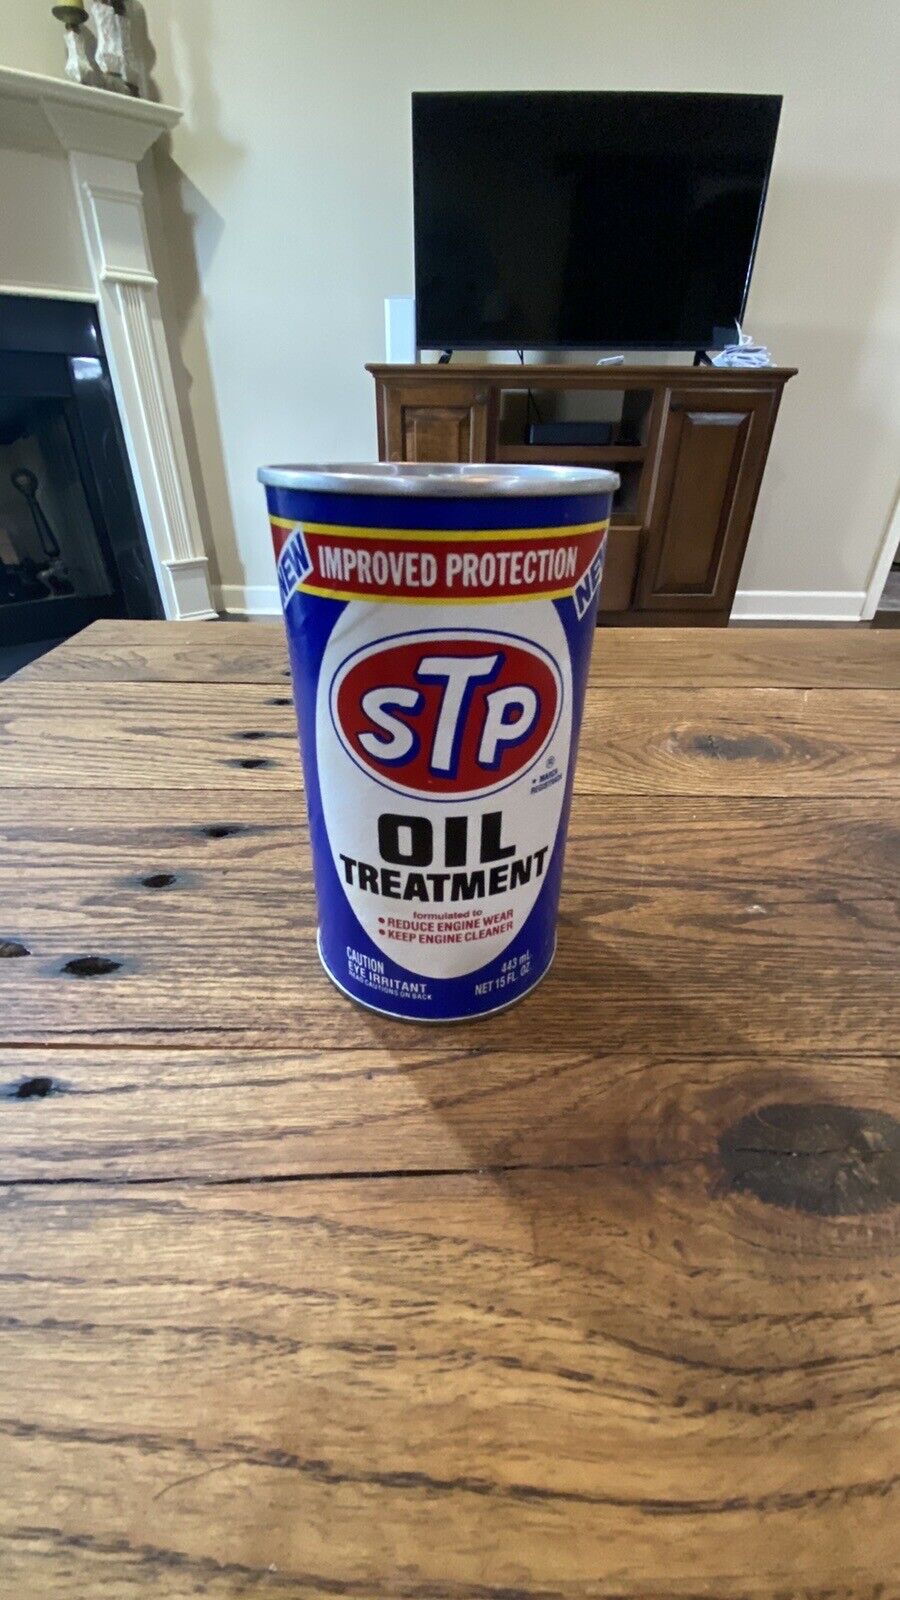 (6)Vintage STP Oil Treatment Cans Full